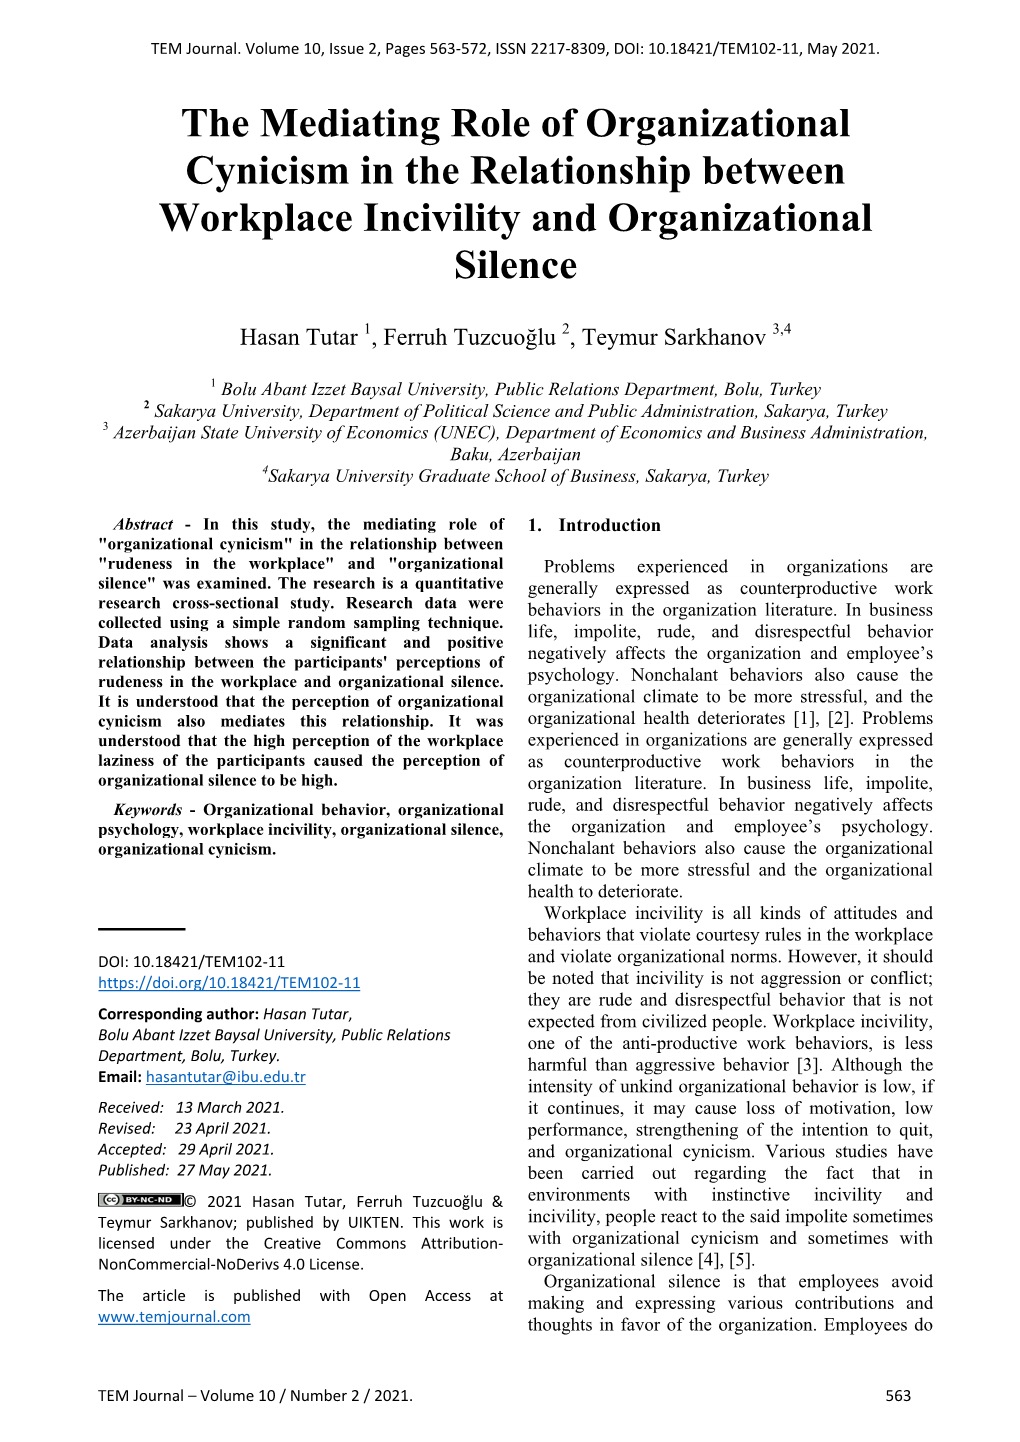 The Mediating Role of Organizational Cynicism in the Relationship Between Workplace Incivility and Organizational Silence